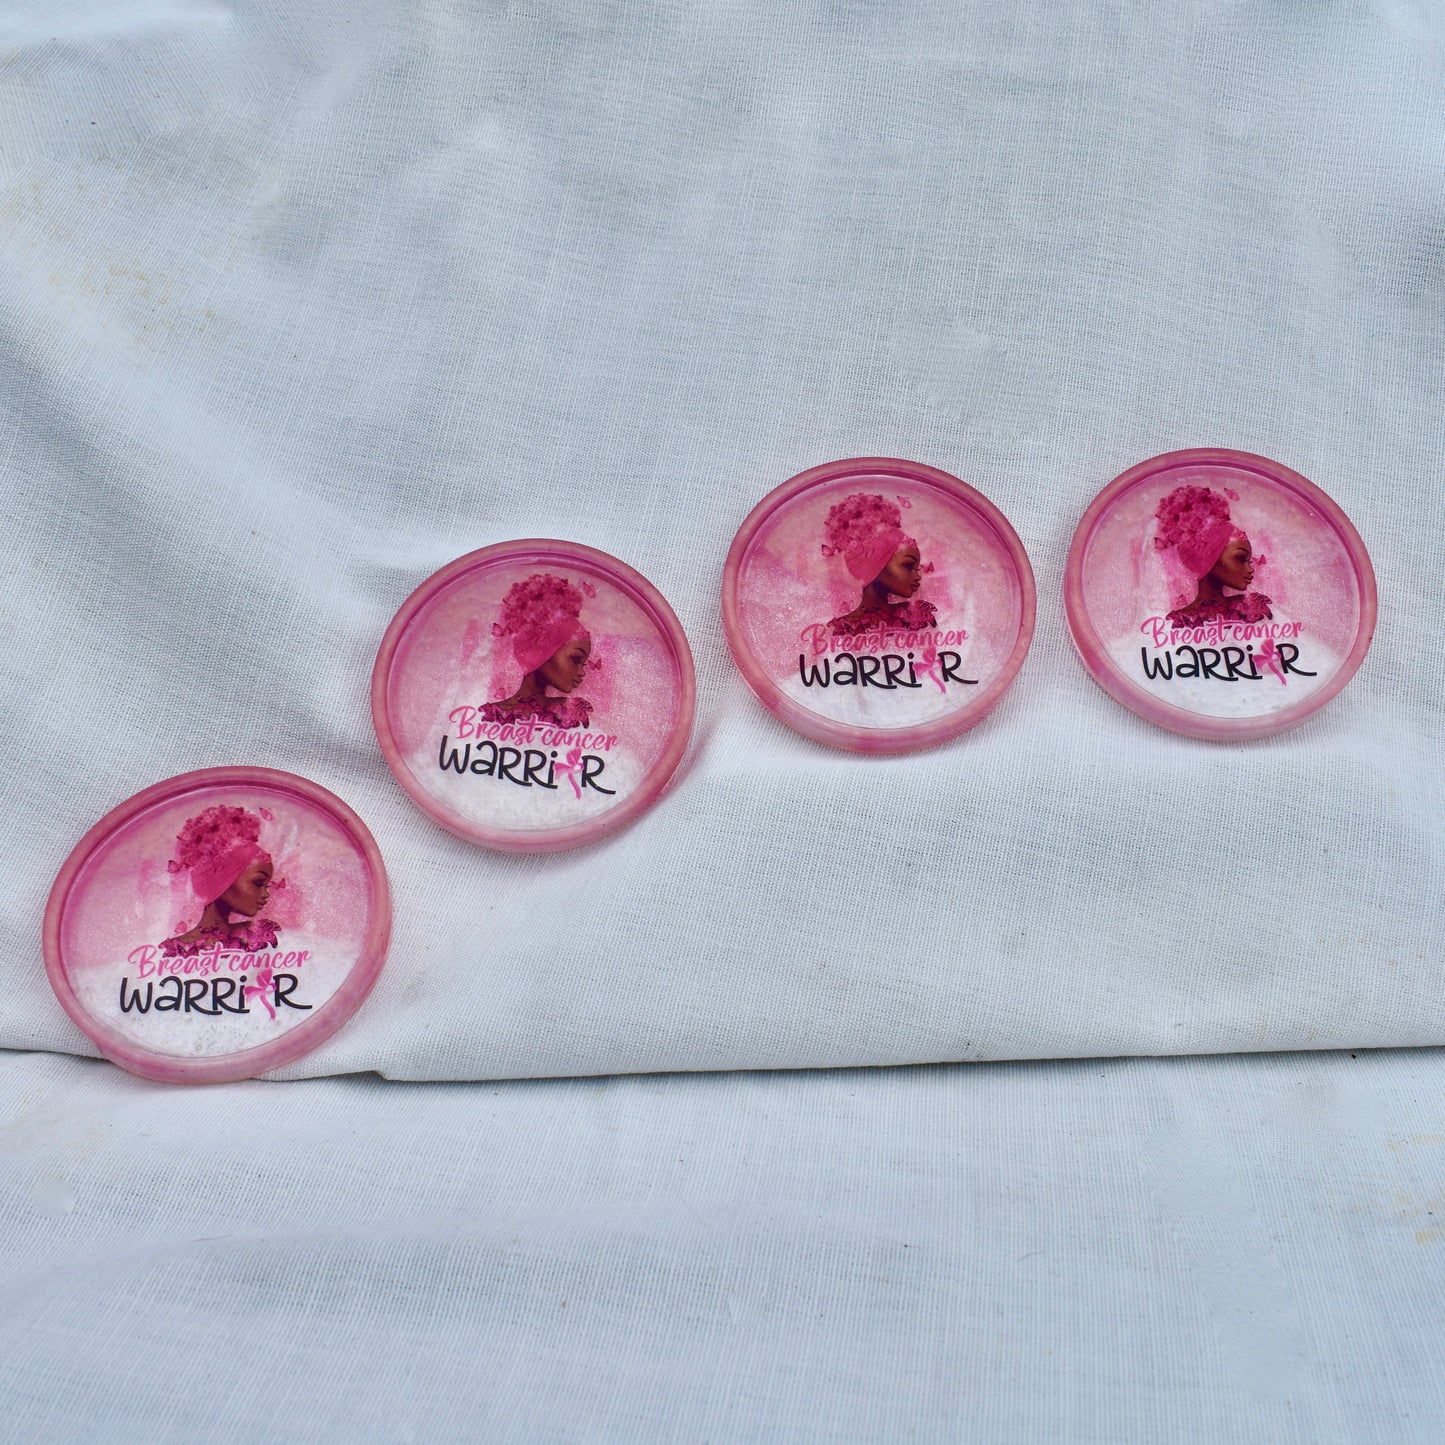 Breast Cancer Warrior Coasters 🎀 Afro Breast Cancer Coasters • Black Cancer Survivor Coasters